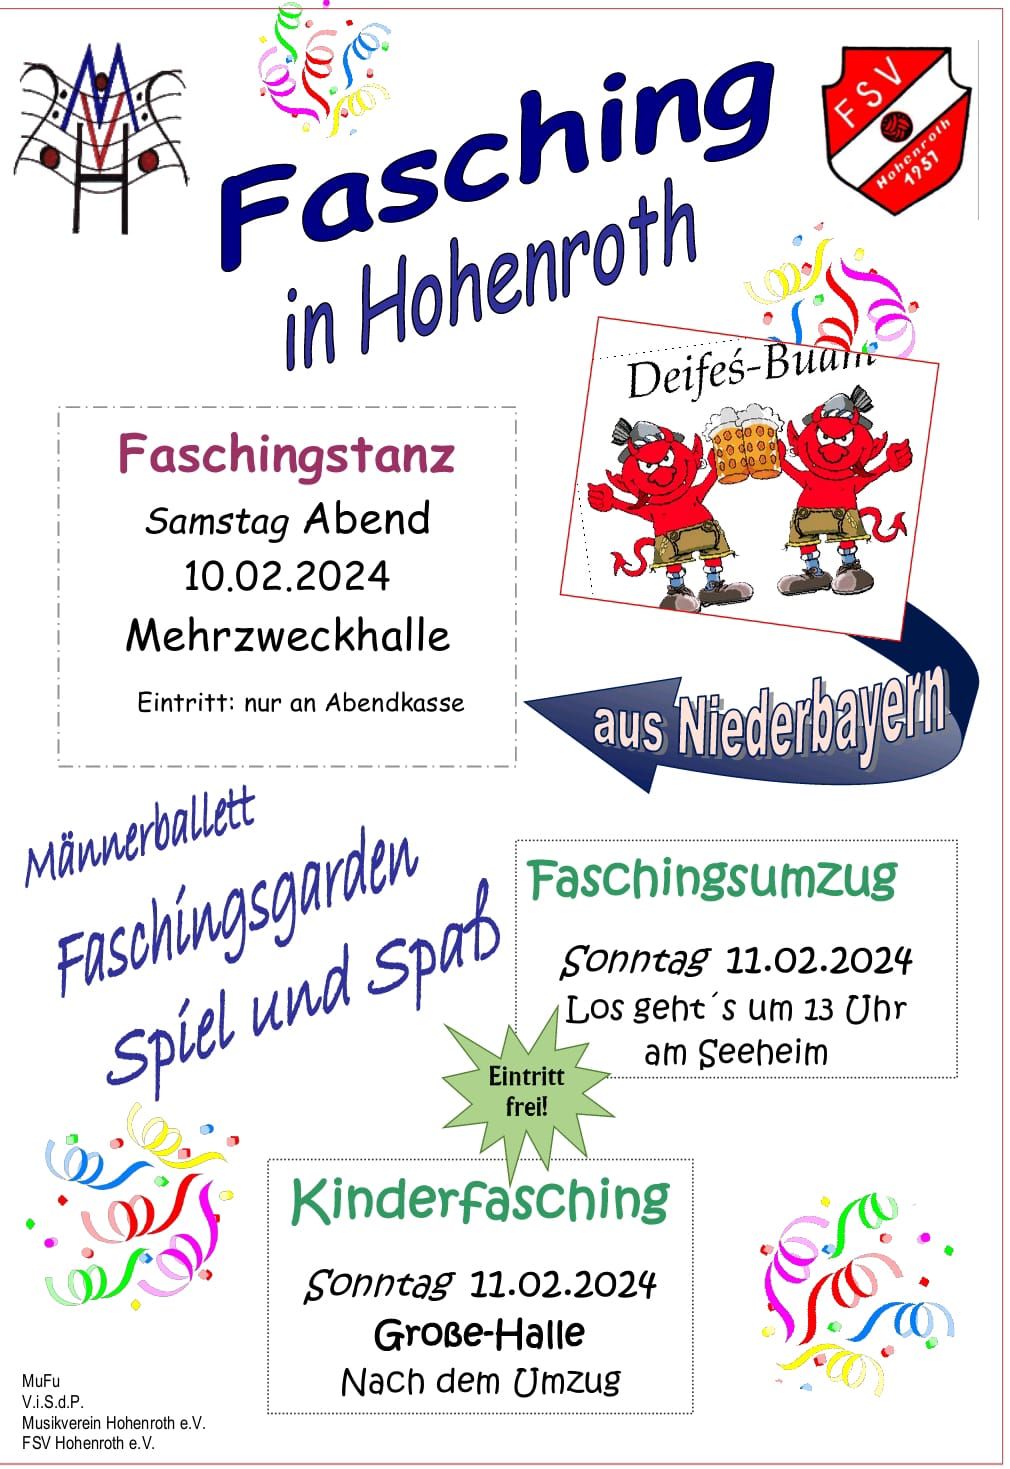 Fasching 2024 in Hohenroth